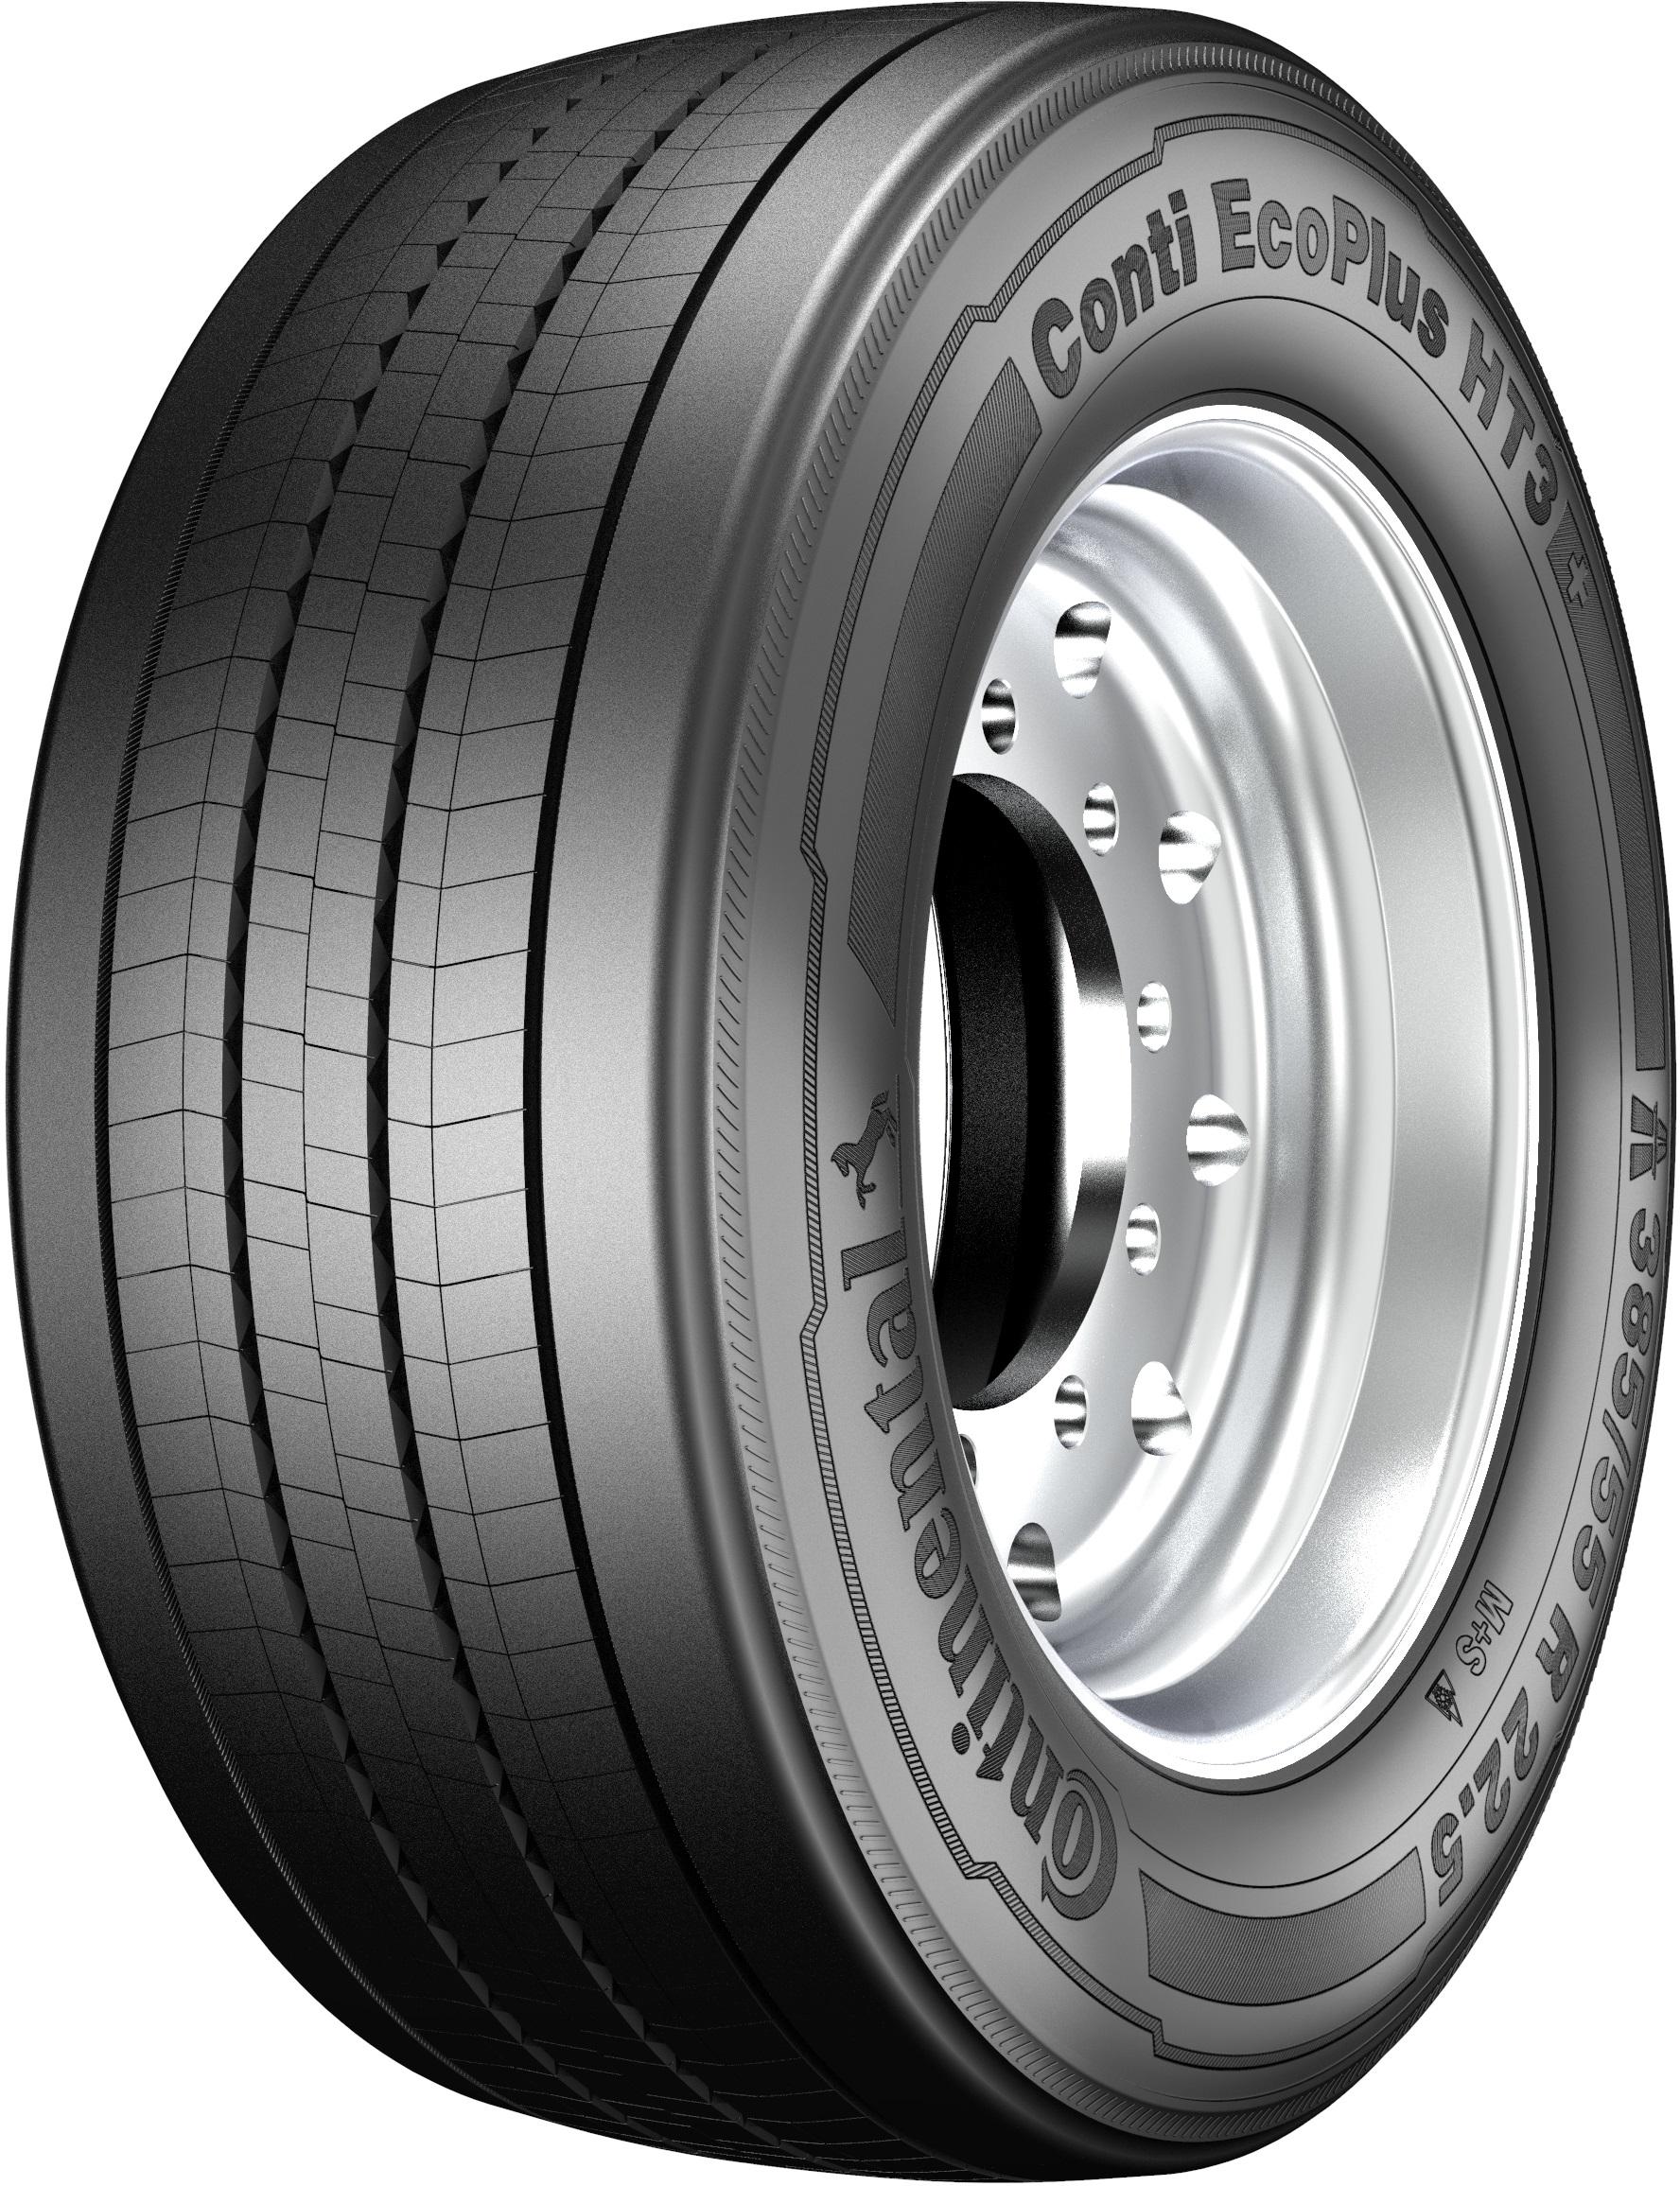 Continental HT3+ EcoPlus Tyres